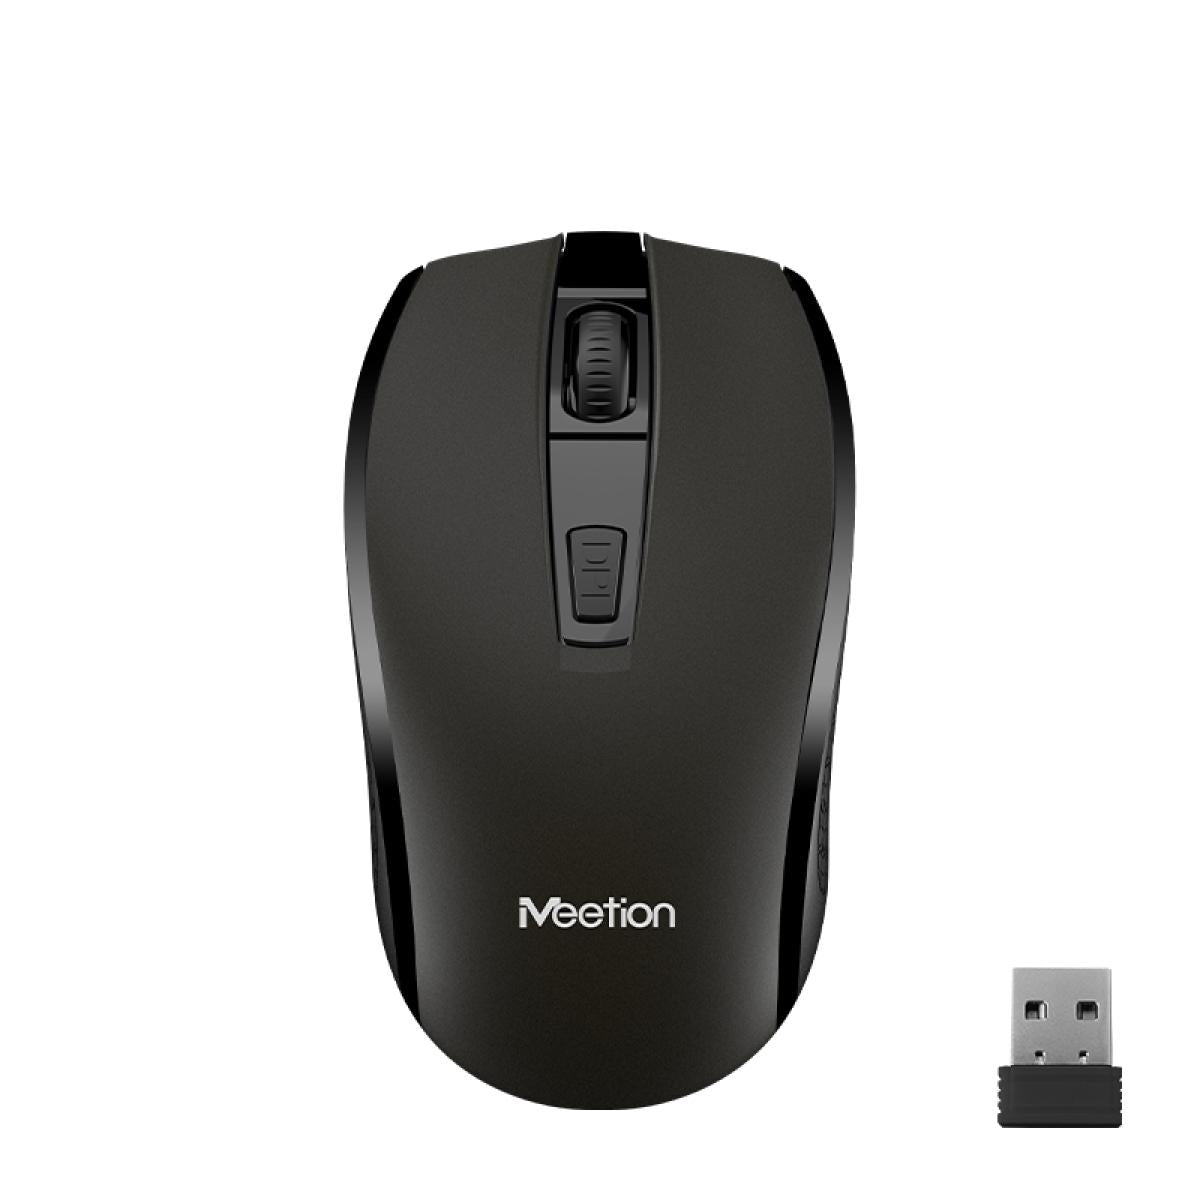 MeeTion 2.4G Wireless Mouse Laptop Optical Mouse - Black